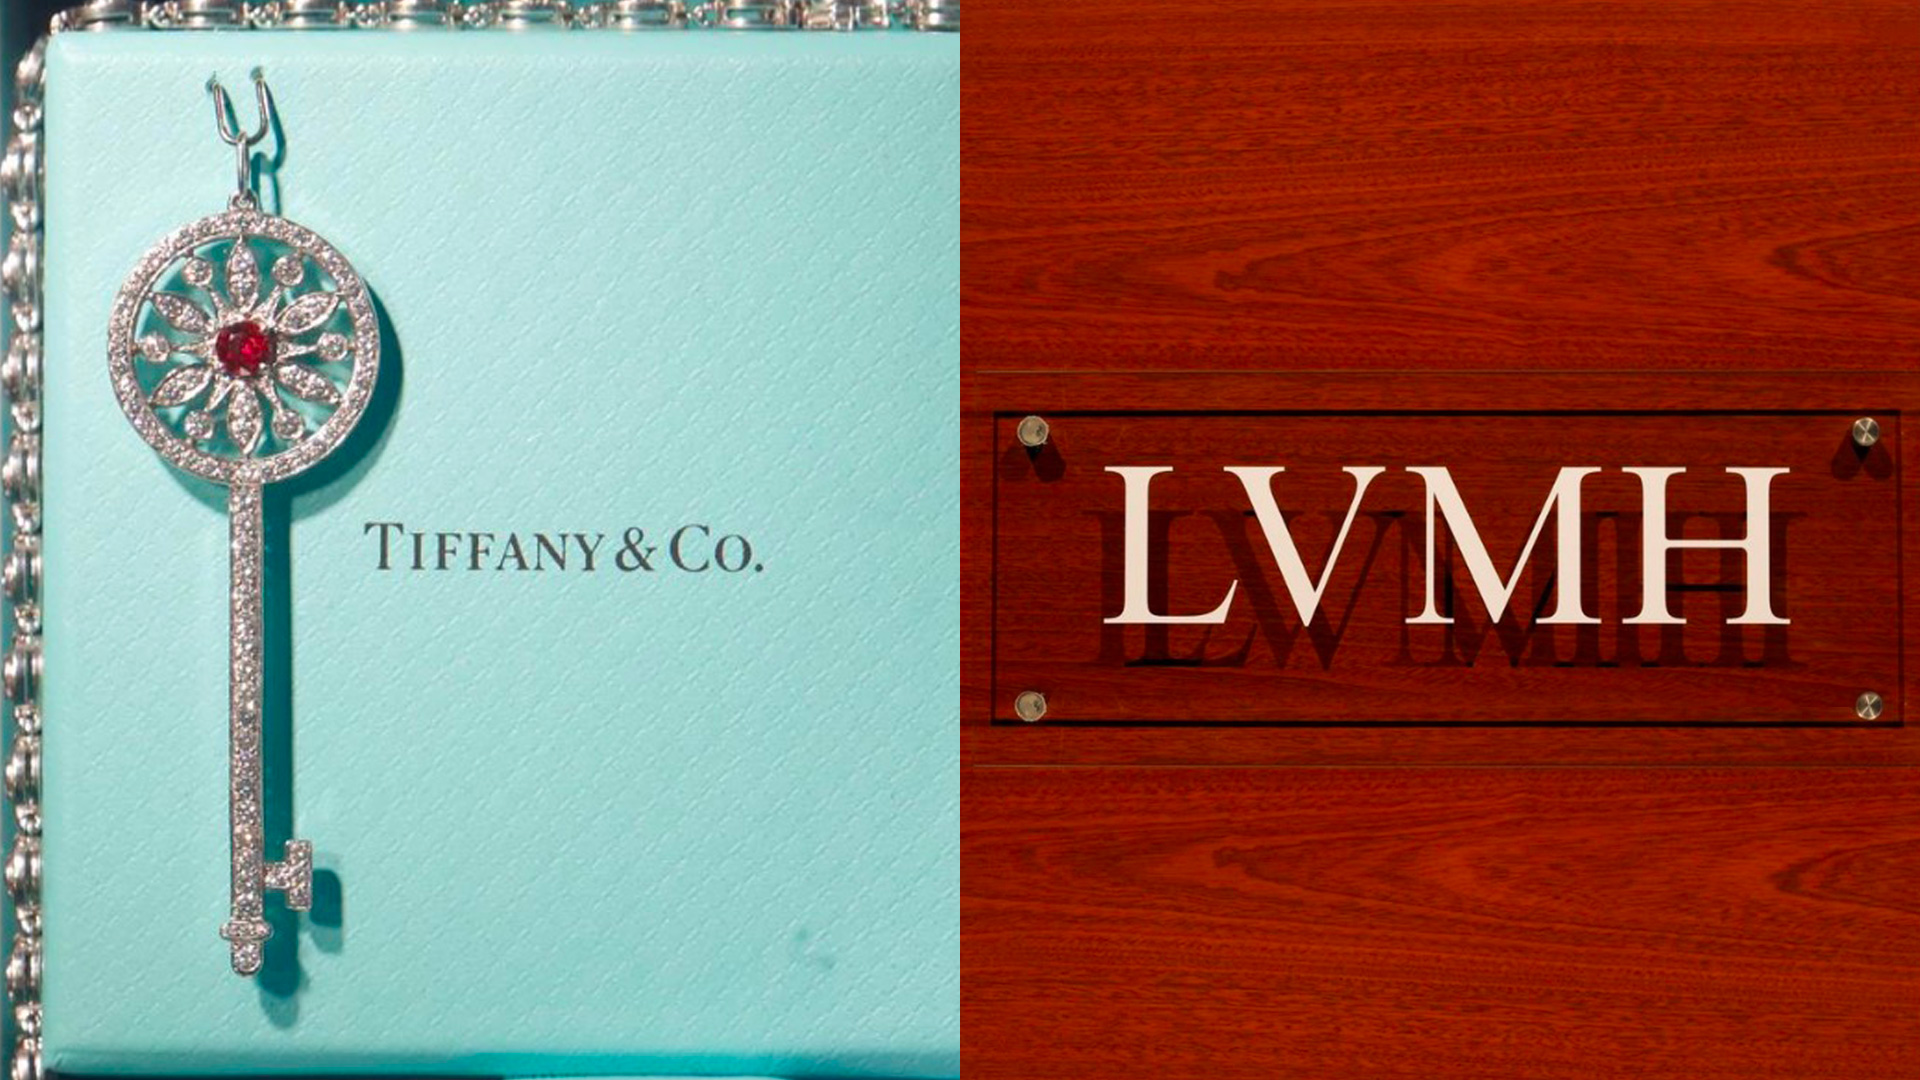 French luxury group LVMH offers to buy U.S jeweler Tiffany, which